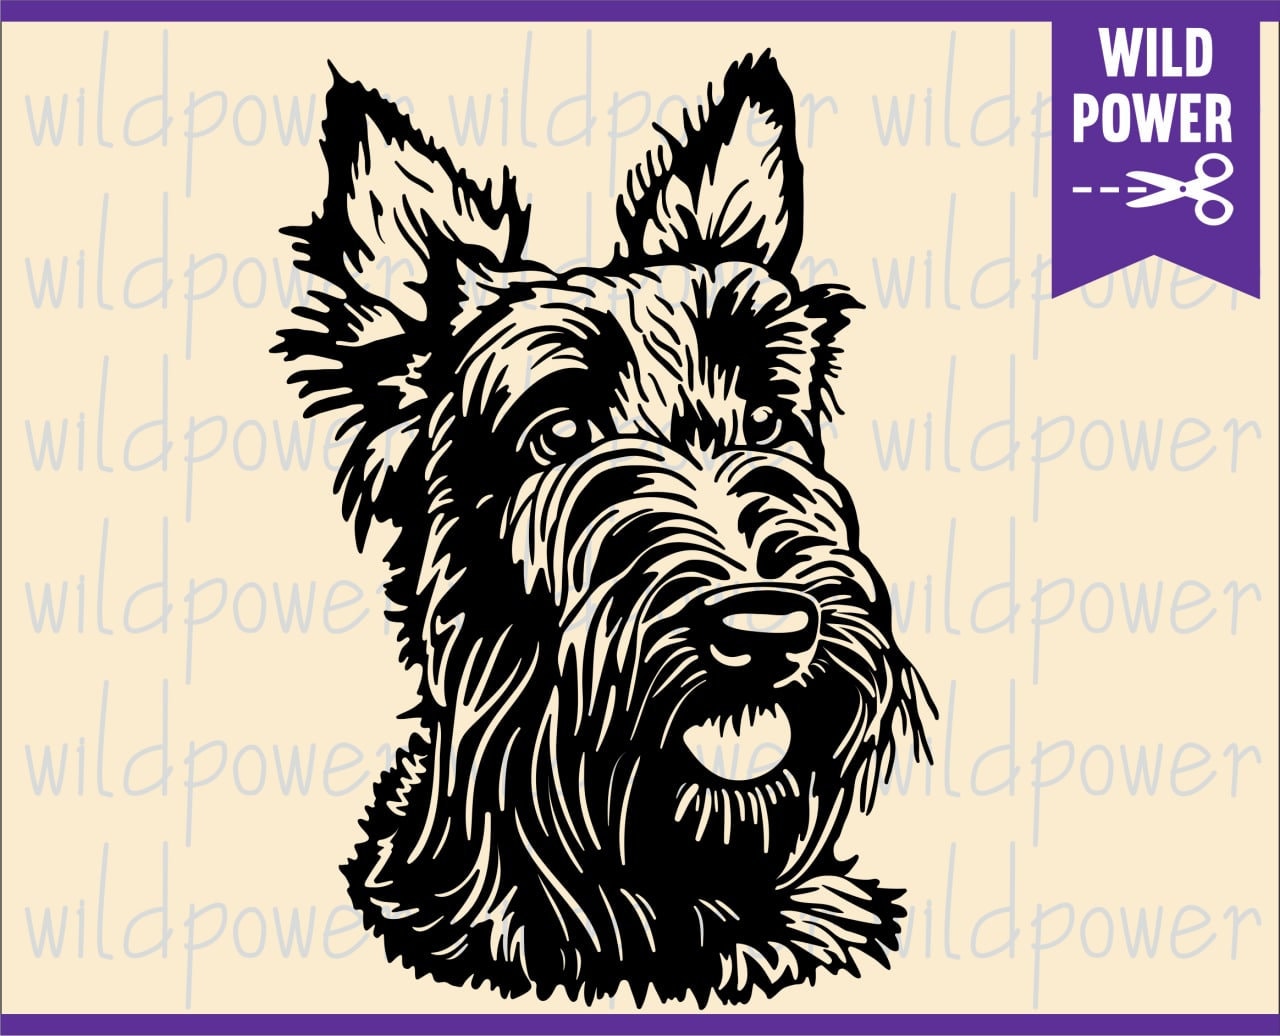 Cute Scottish Terrier Dog Icon on the App Store